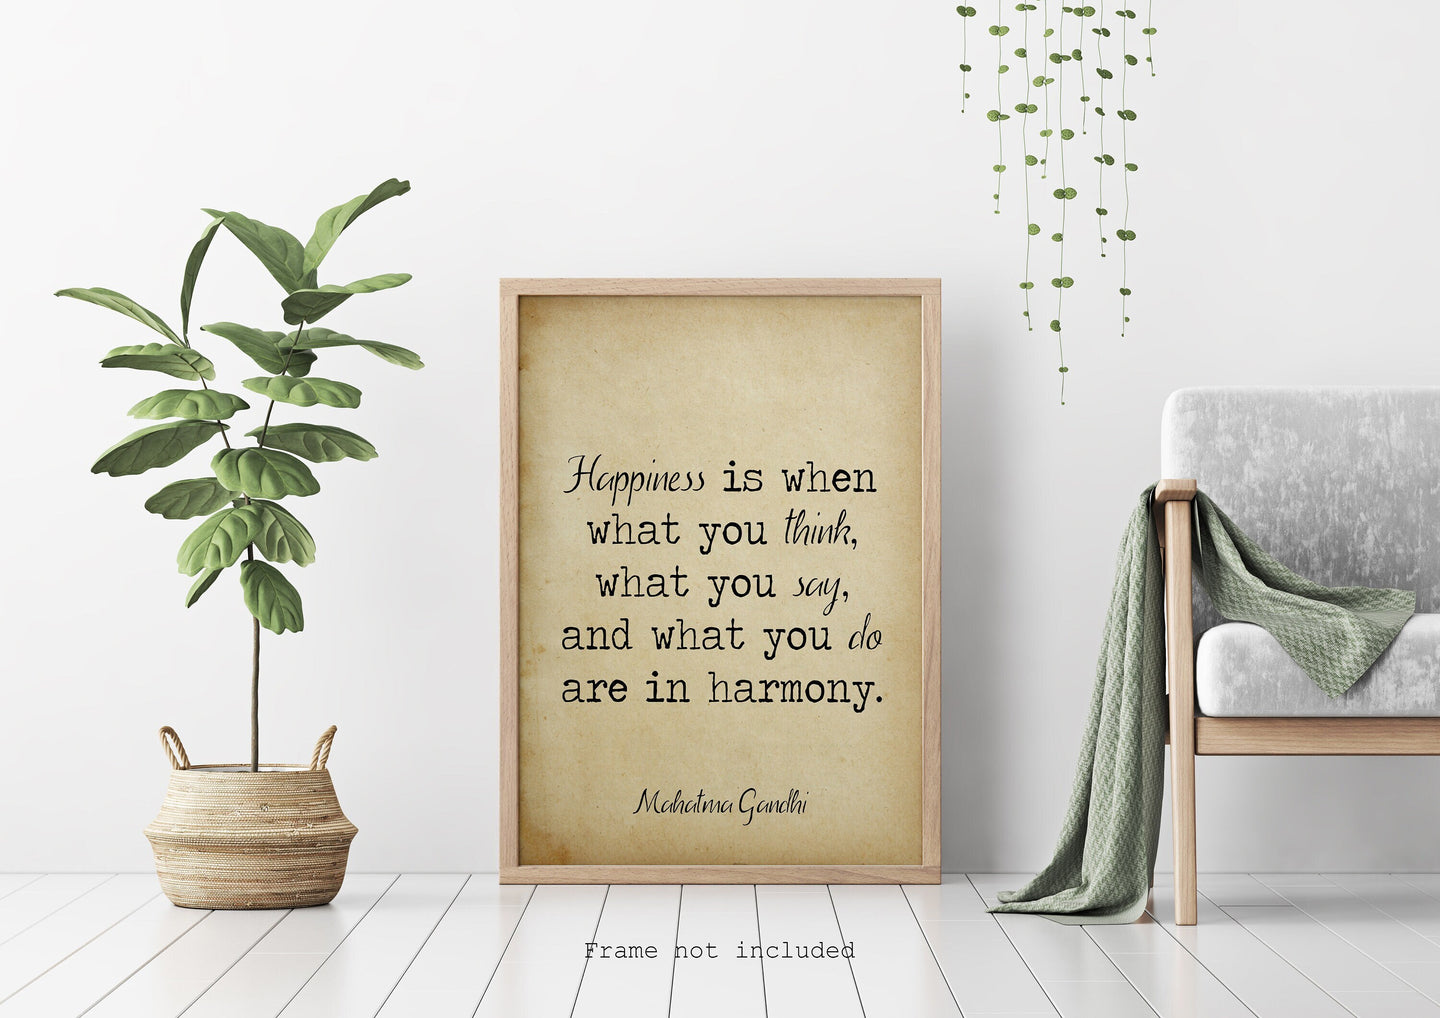 Gandhi Happiness quote - Happiness is when what you think, what you say, and what you do are in harmony